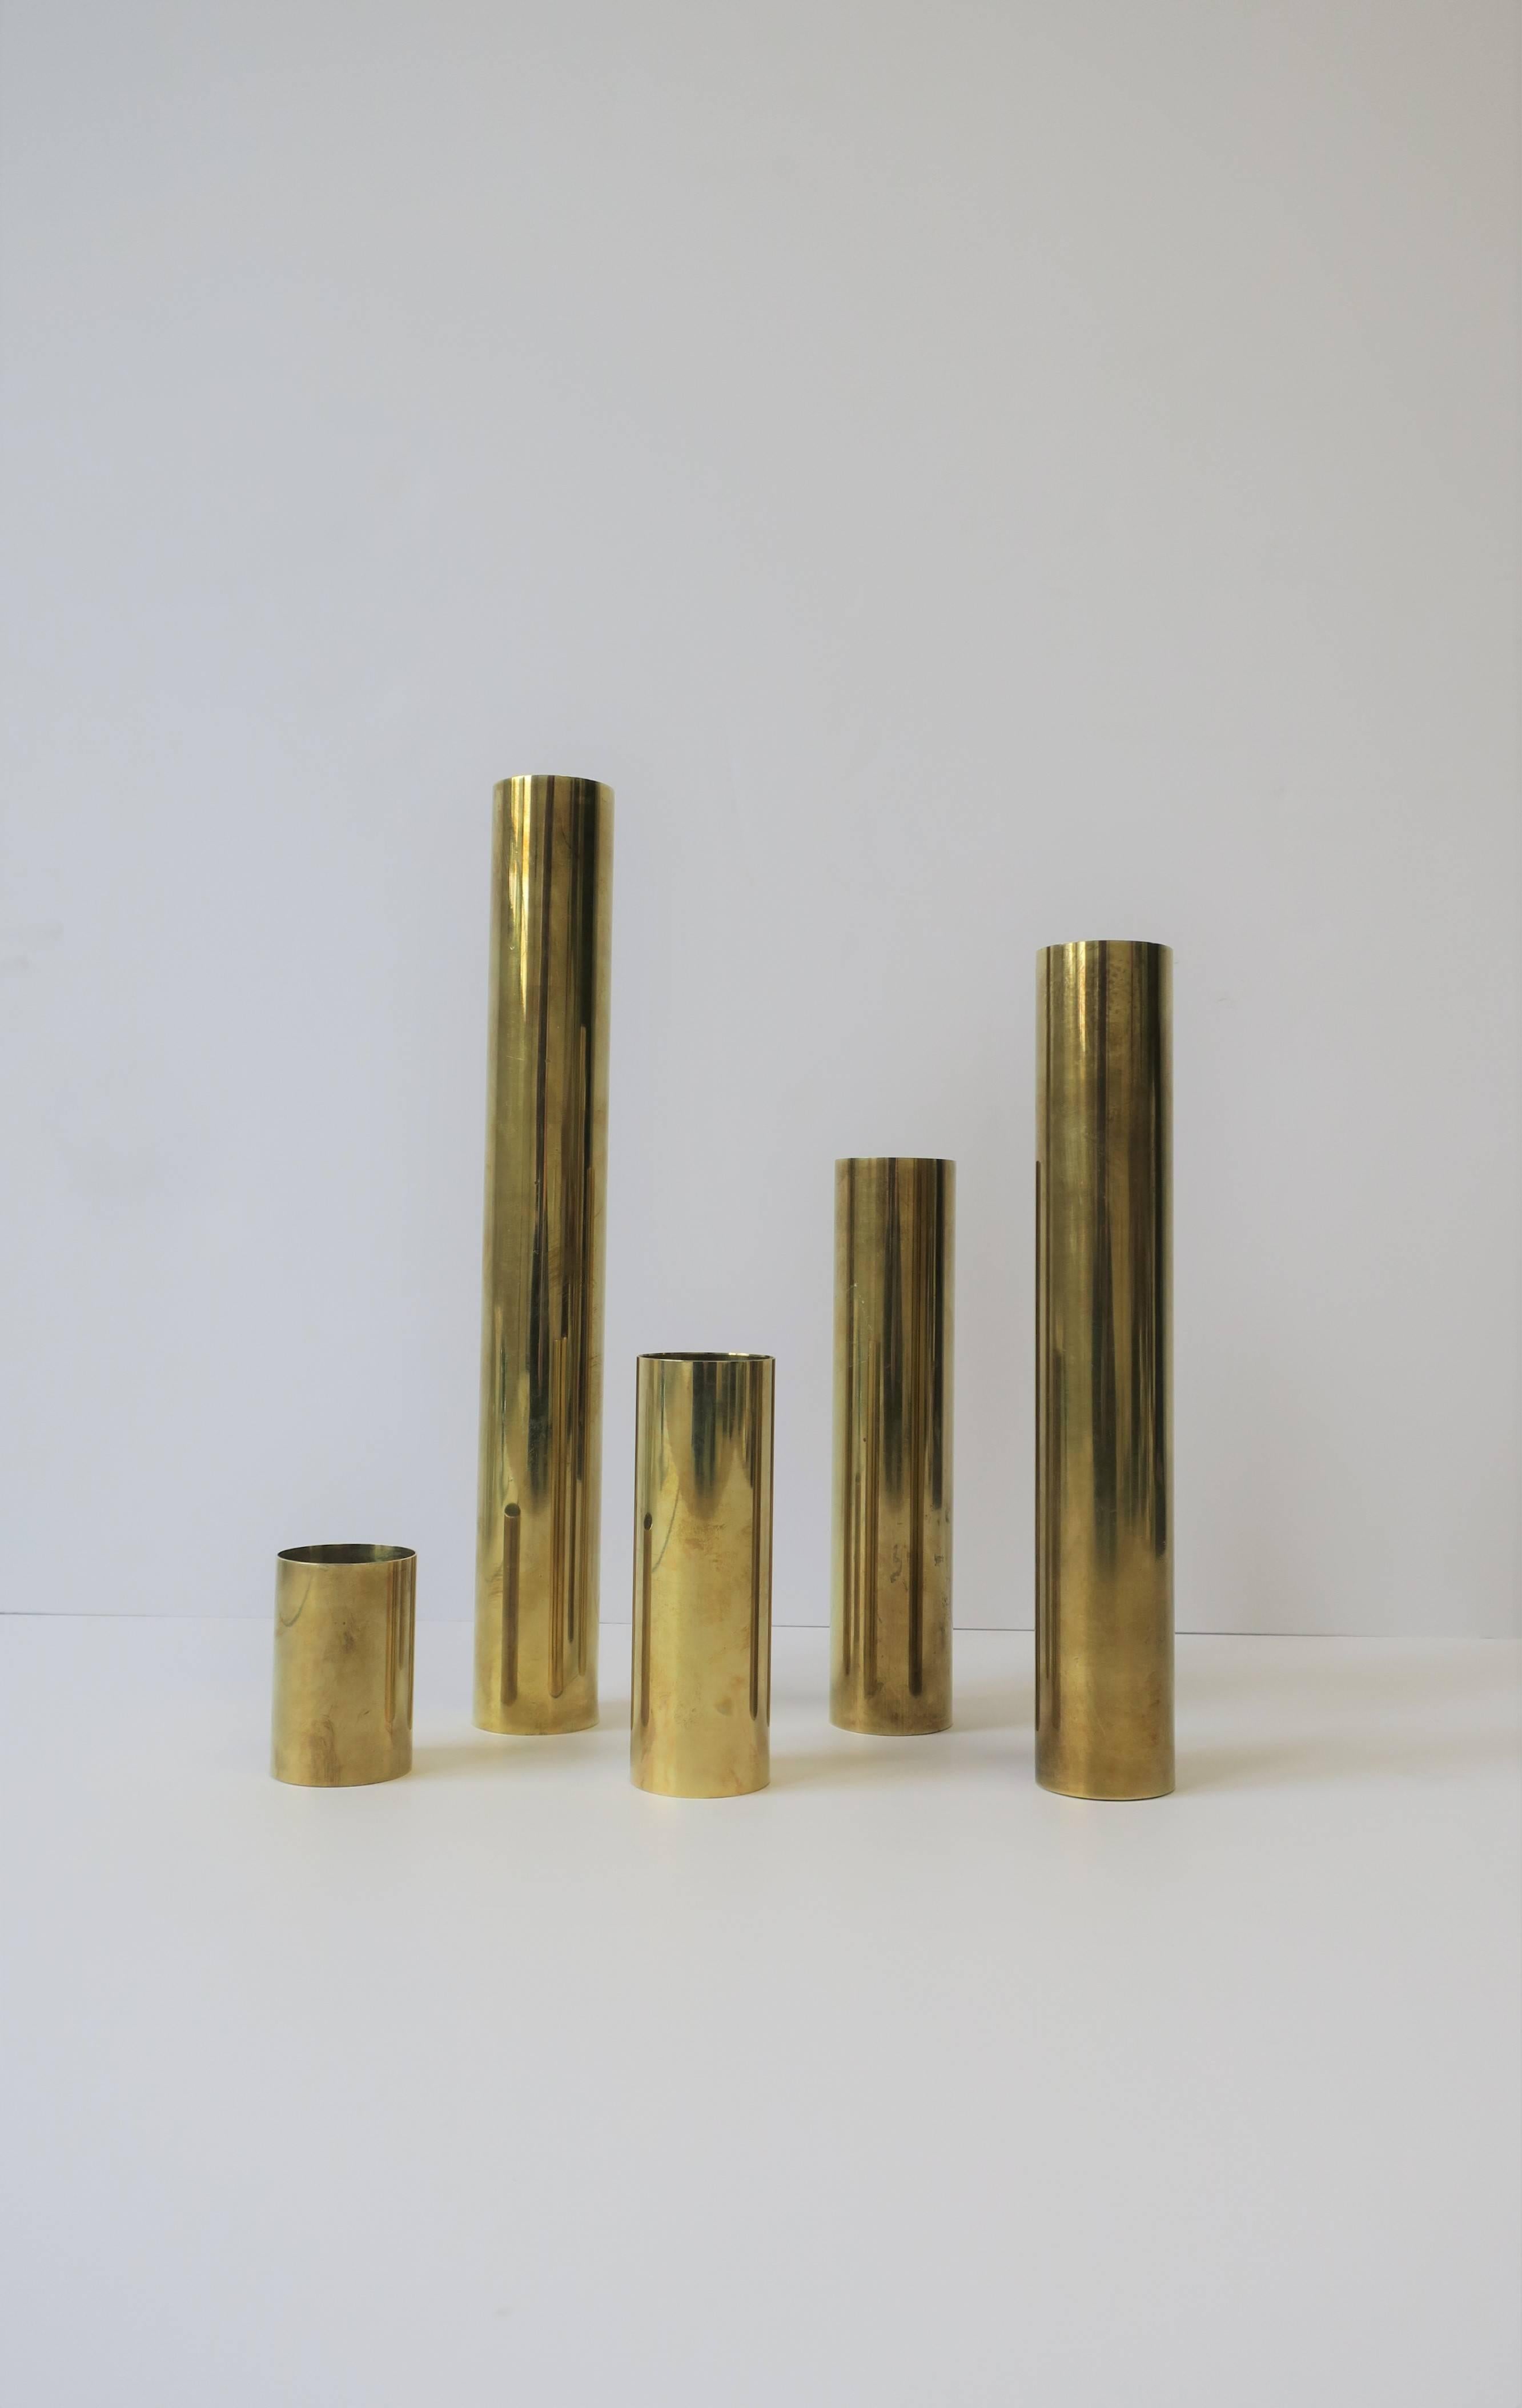 A set of five, versatile, modern style brass cylindrical sculpture vessels, circa late 20th century. Vessels are strategically weighted at bottom. Side table shown in image #3 also available; search ID #: LU1314211182461

Height measurements:
12.25